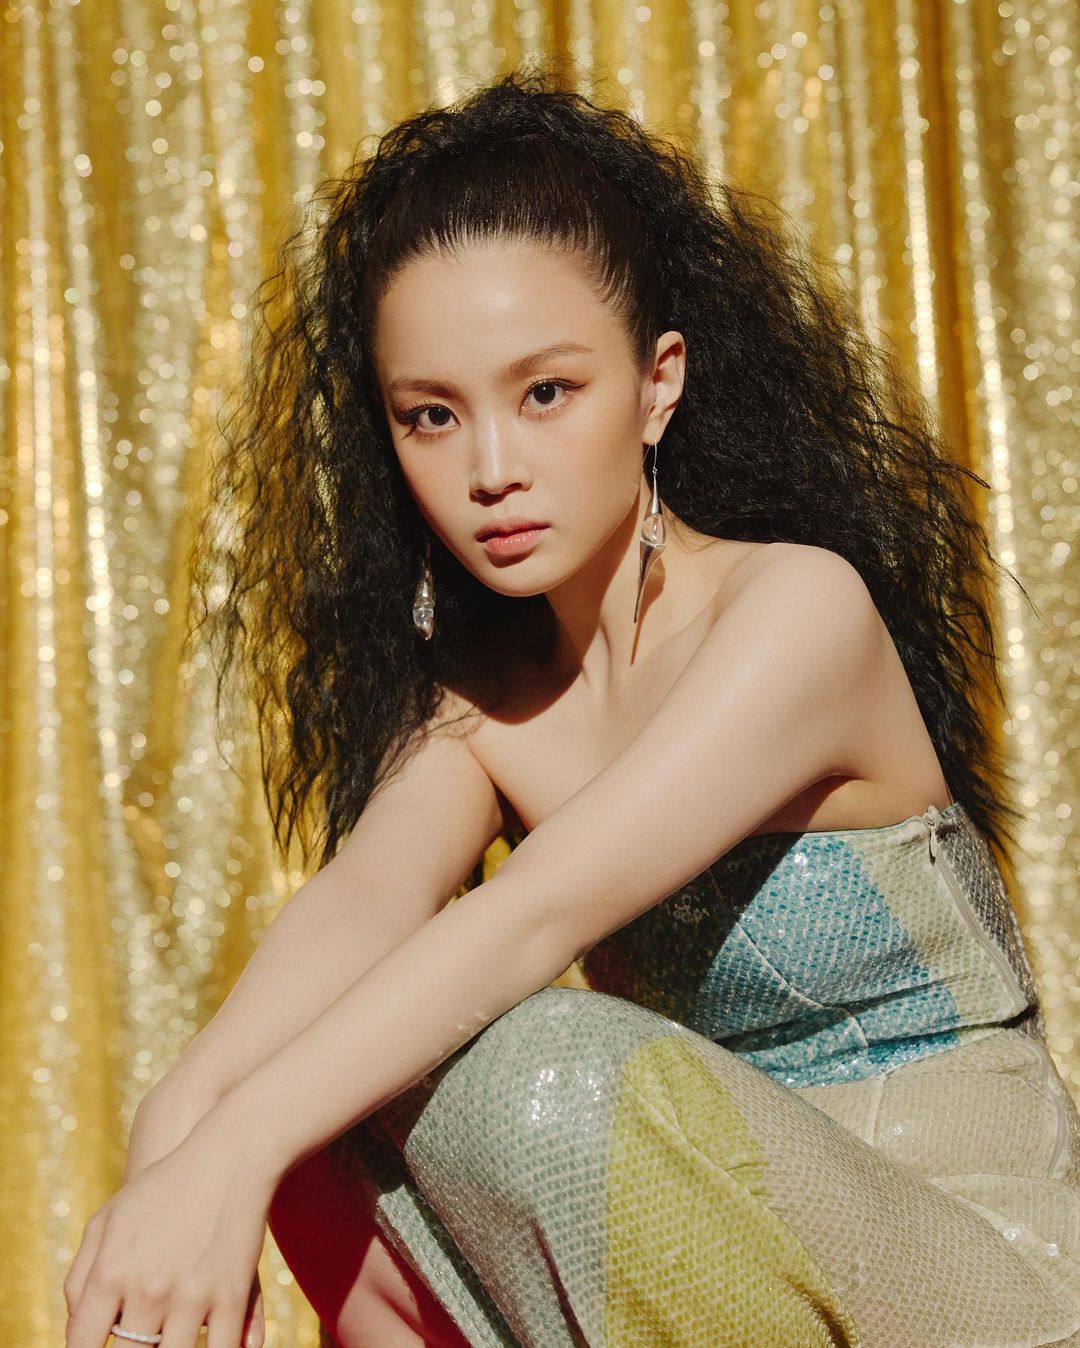 Lee Hi releases full album after 5 years... a completely different atmosphere